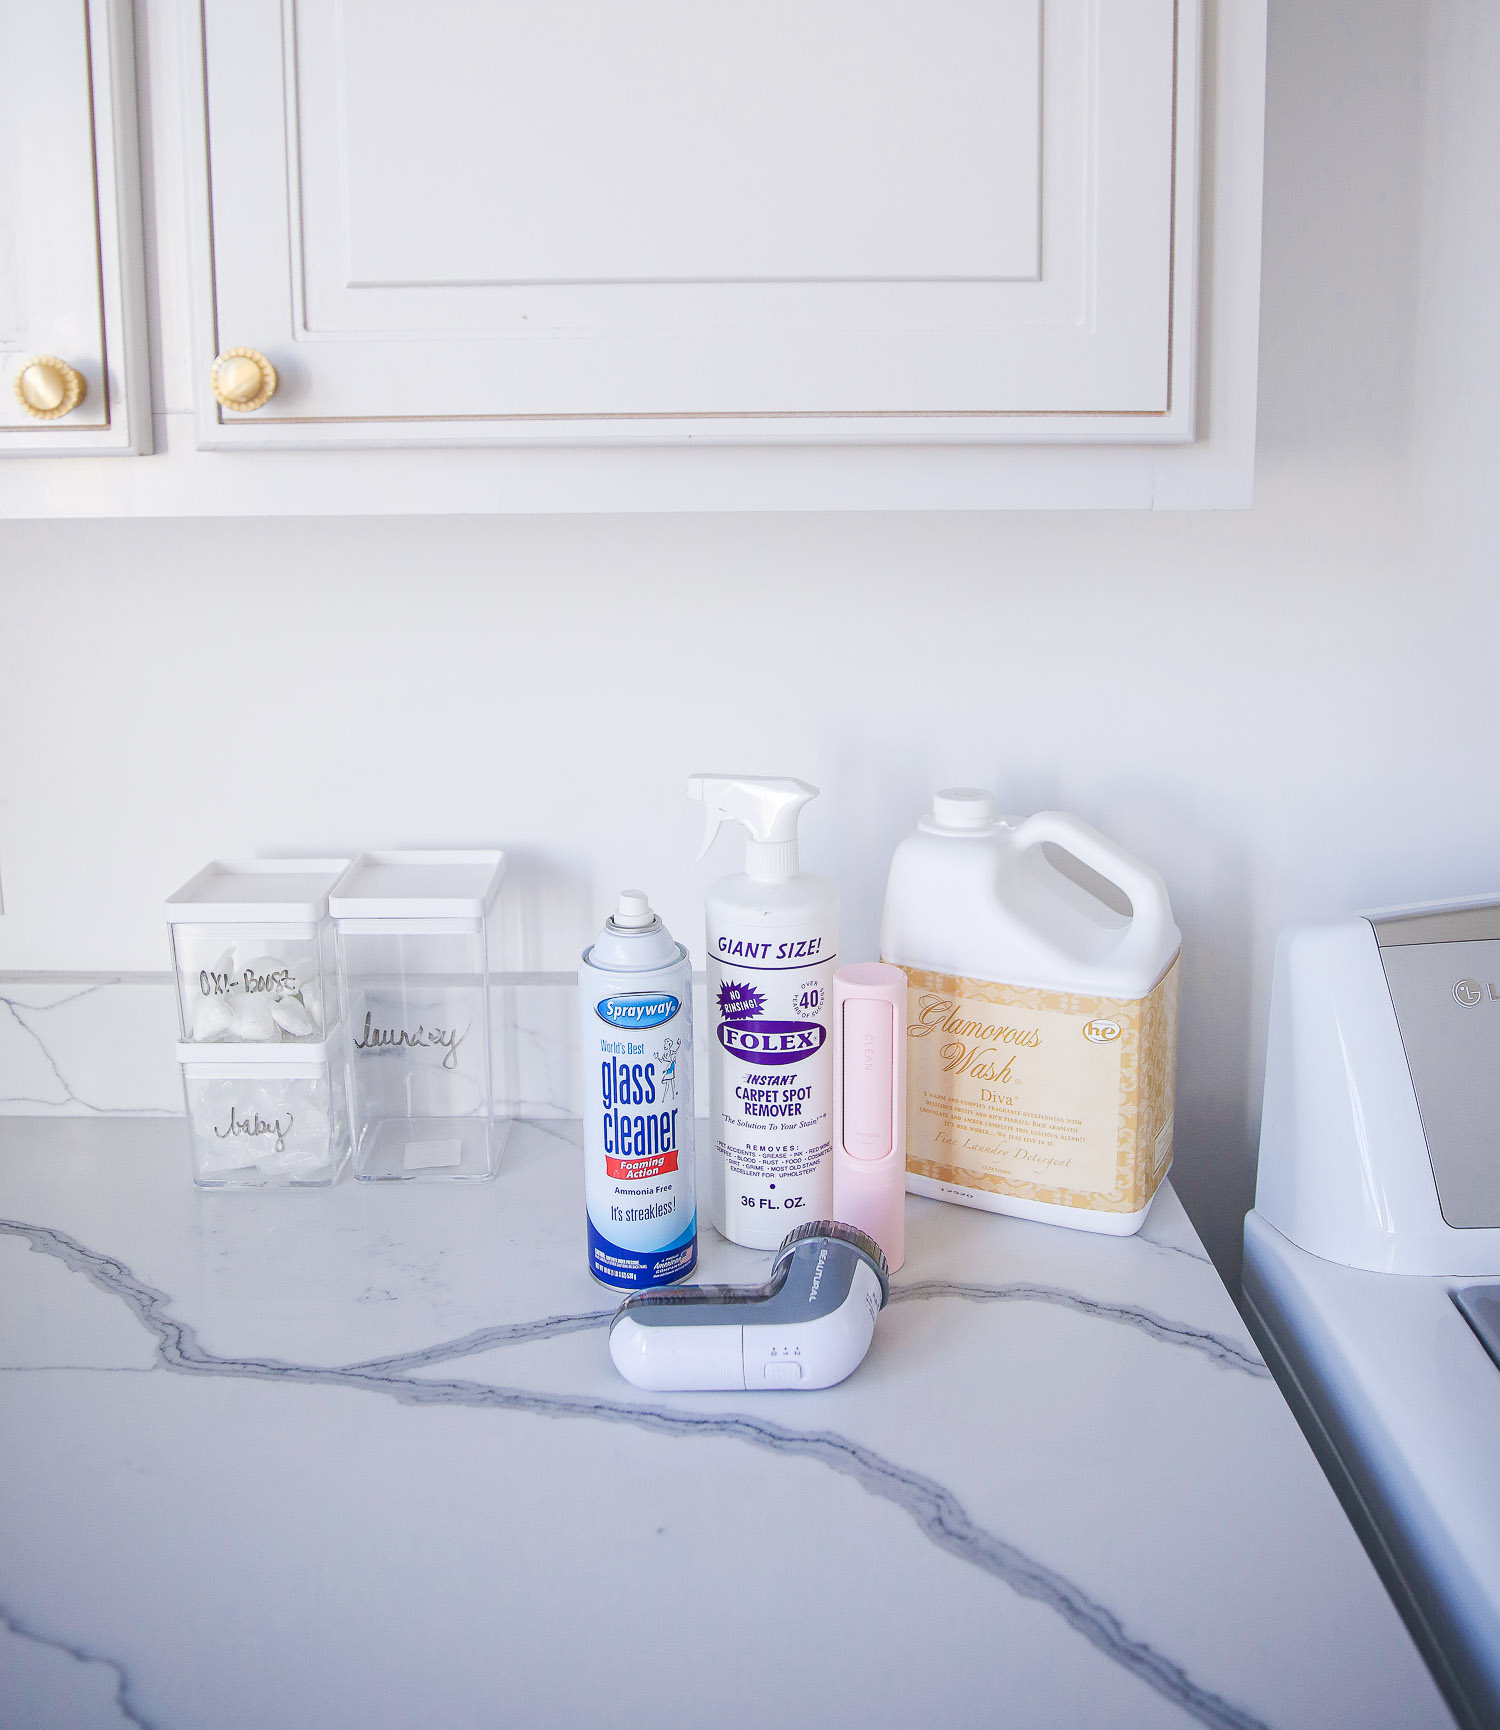 amazon must haves, laundry room amazon must haves cleaner and detergent, diva detergent amazon |Amazon Must Haves by popular US life and style blog, The Sweetest Thing: image of spray away glass cleaner, Folex carpet spot remover, Glamorous Wash Diva, and lint collector. 